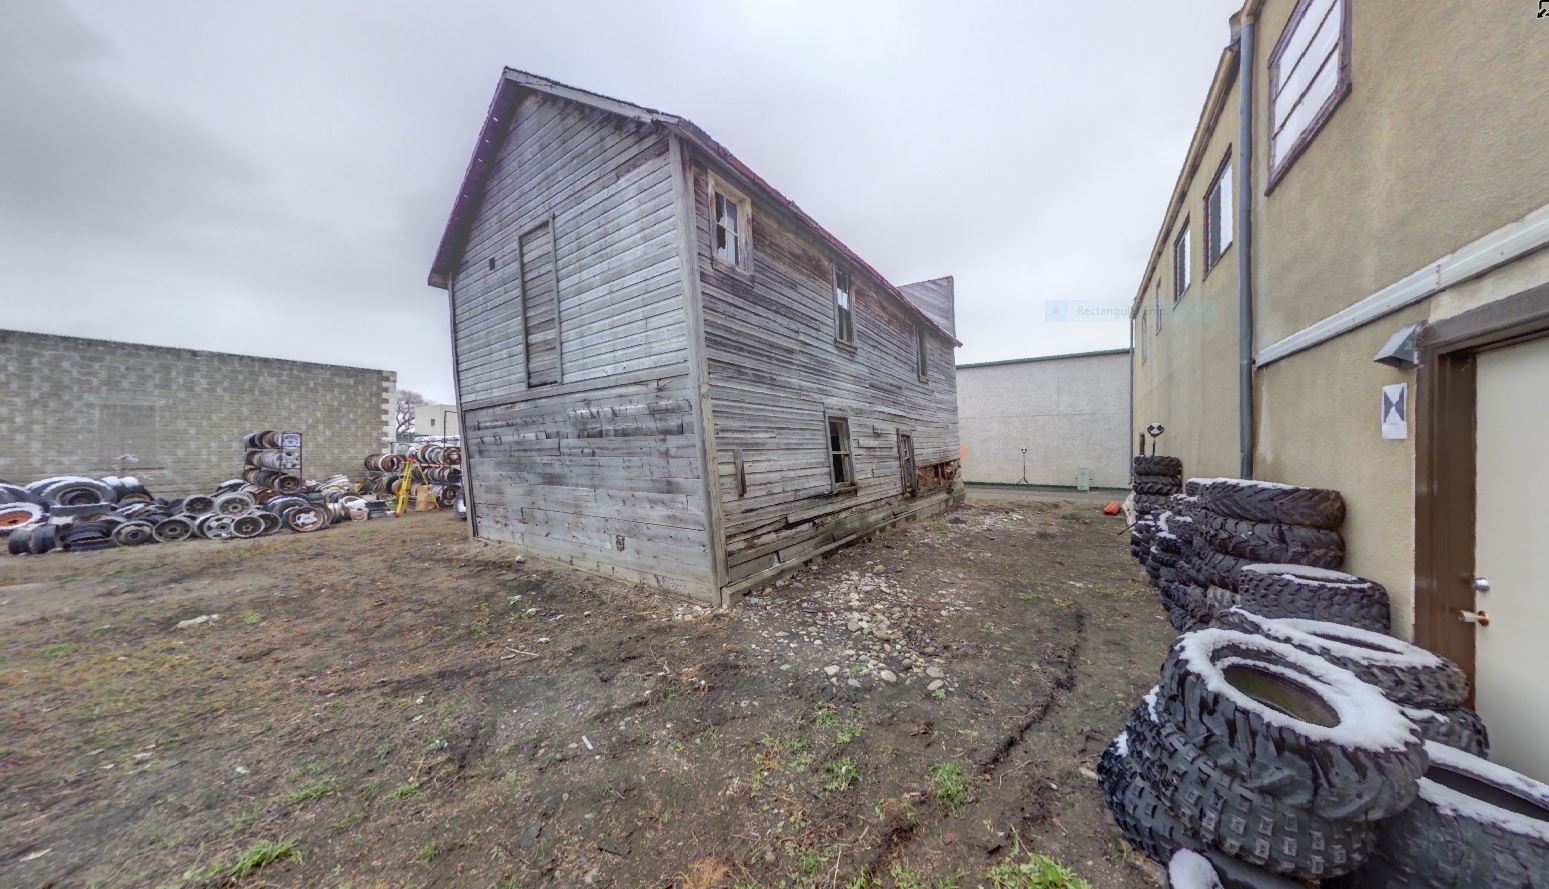 Panoramic view of scanning location 4 of the Quon Sang Lung Laundry Shop.